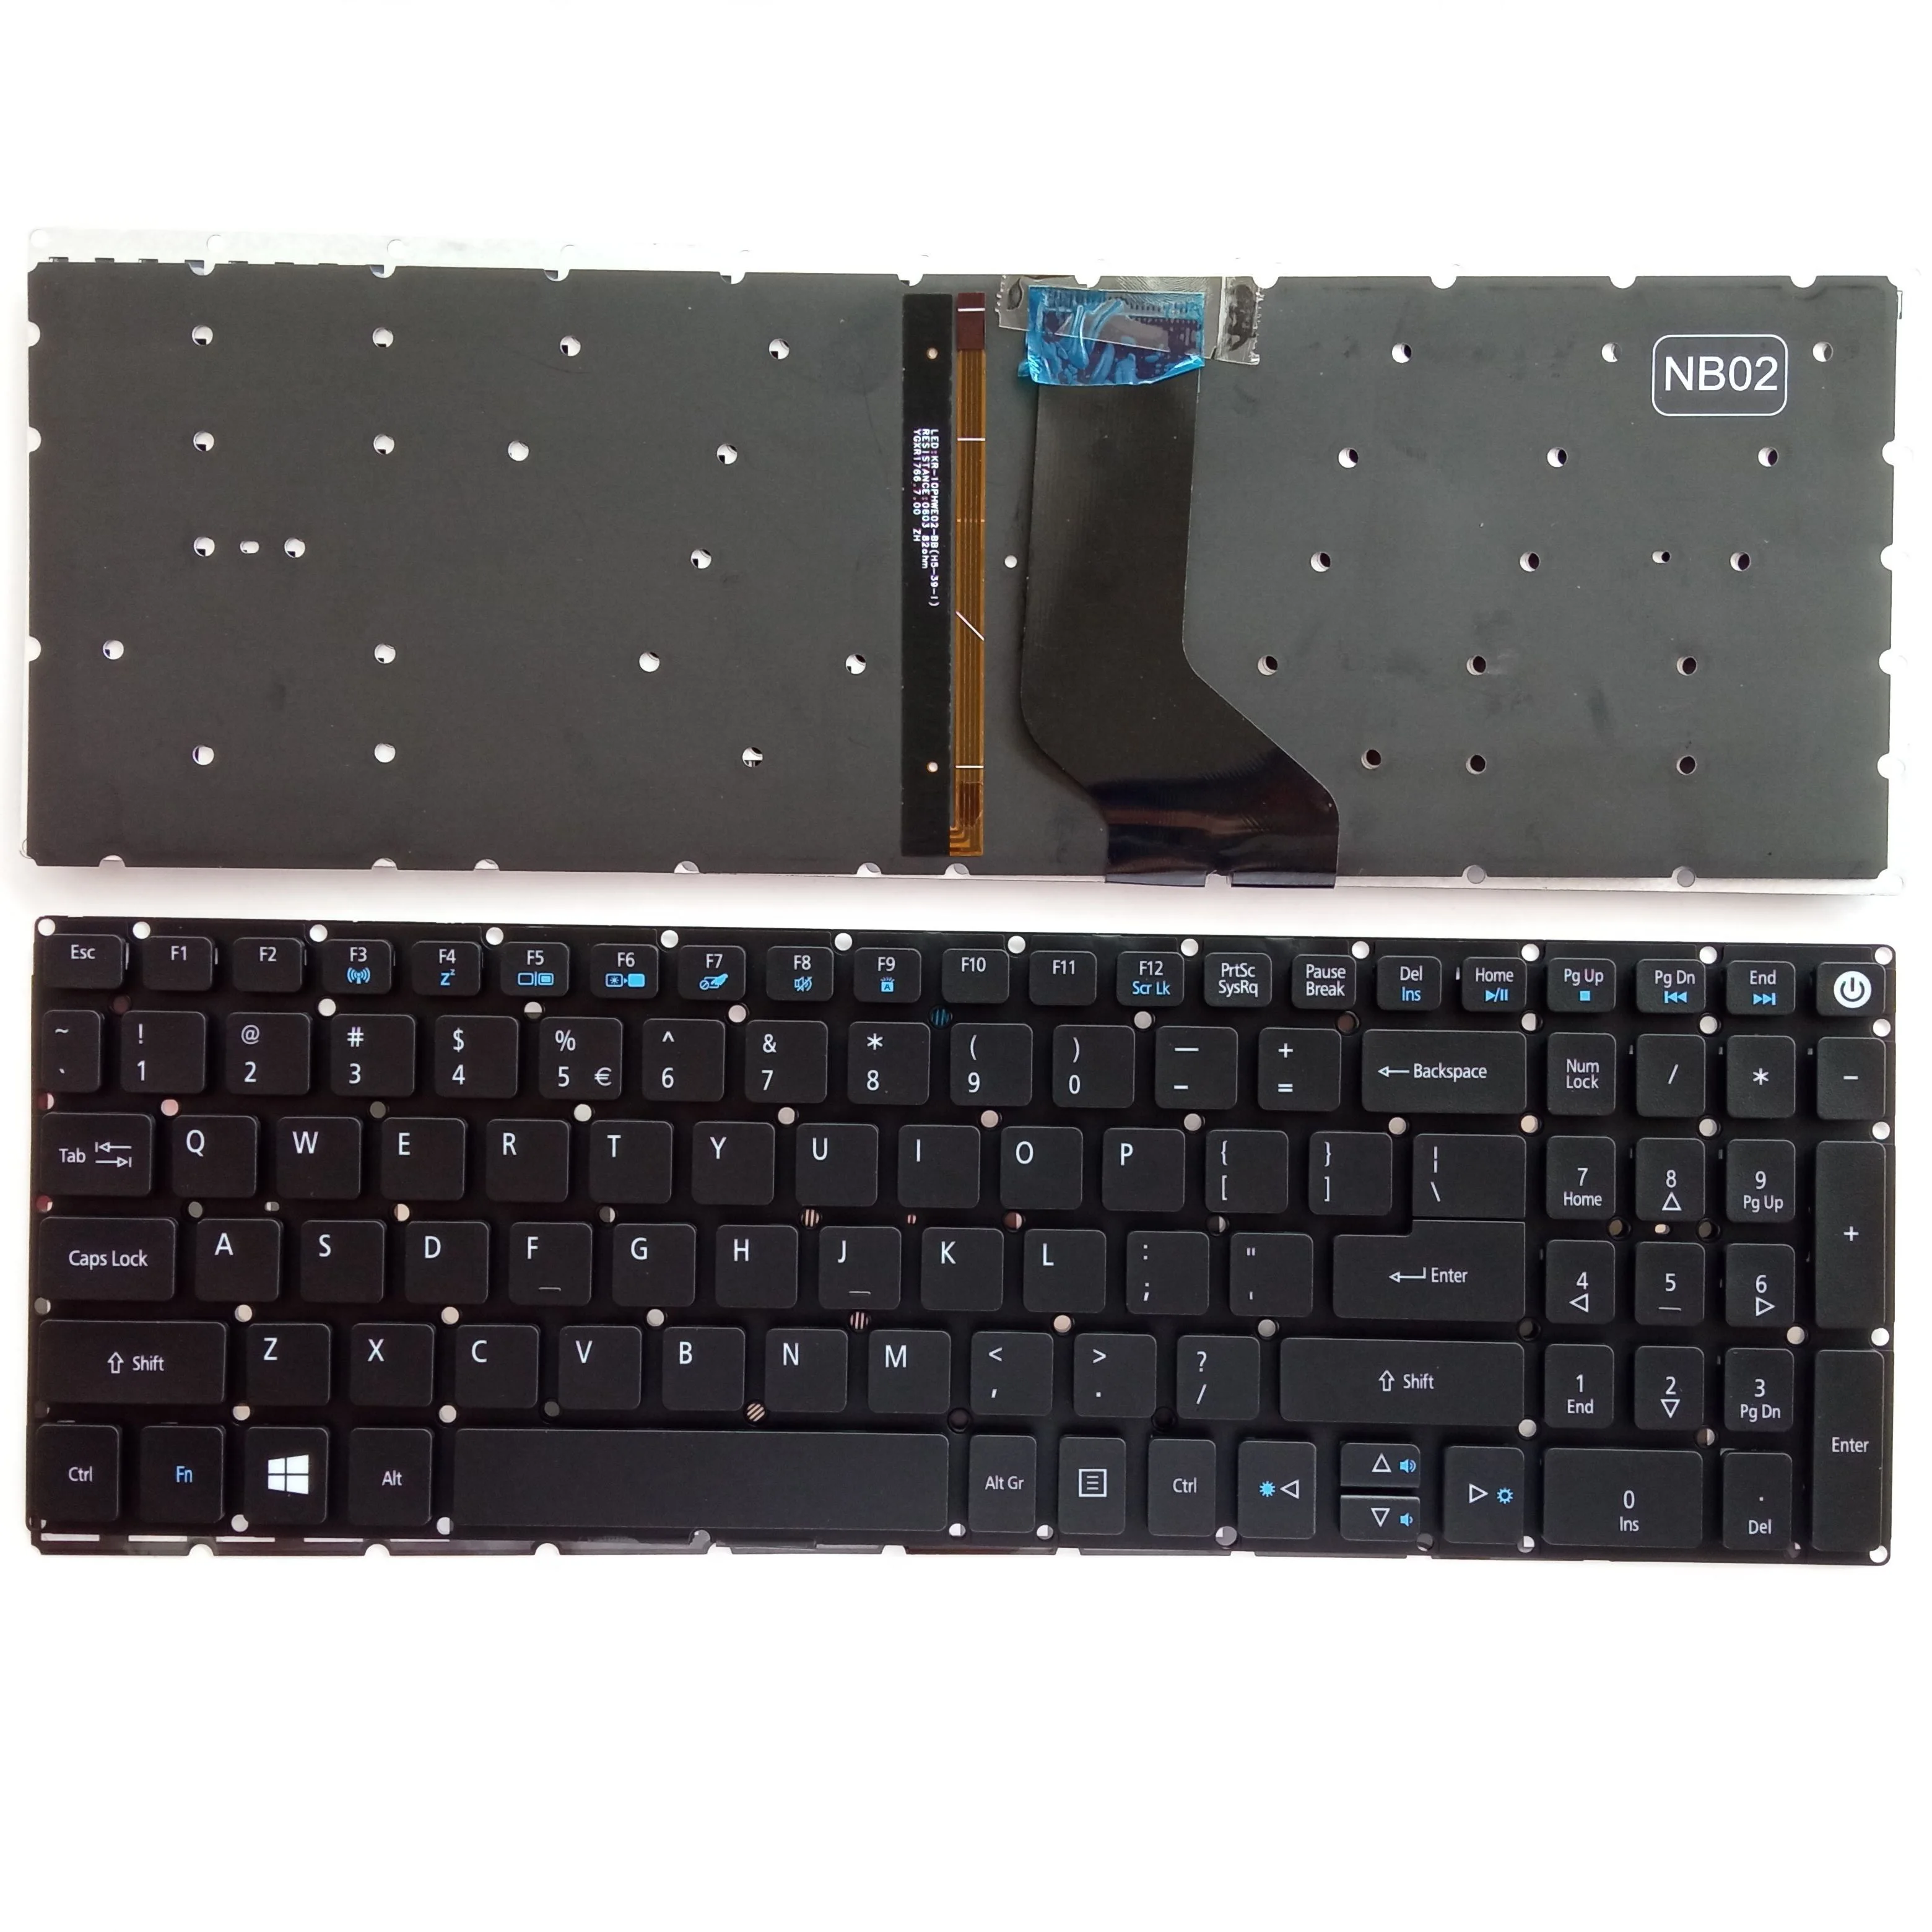 

NEW US keyboard for Acer Aspire E5-573 E5-573T E5-573TG E5-573G E5-722 US laptop keyboard with backlight